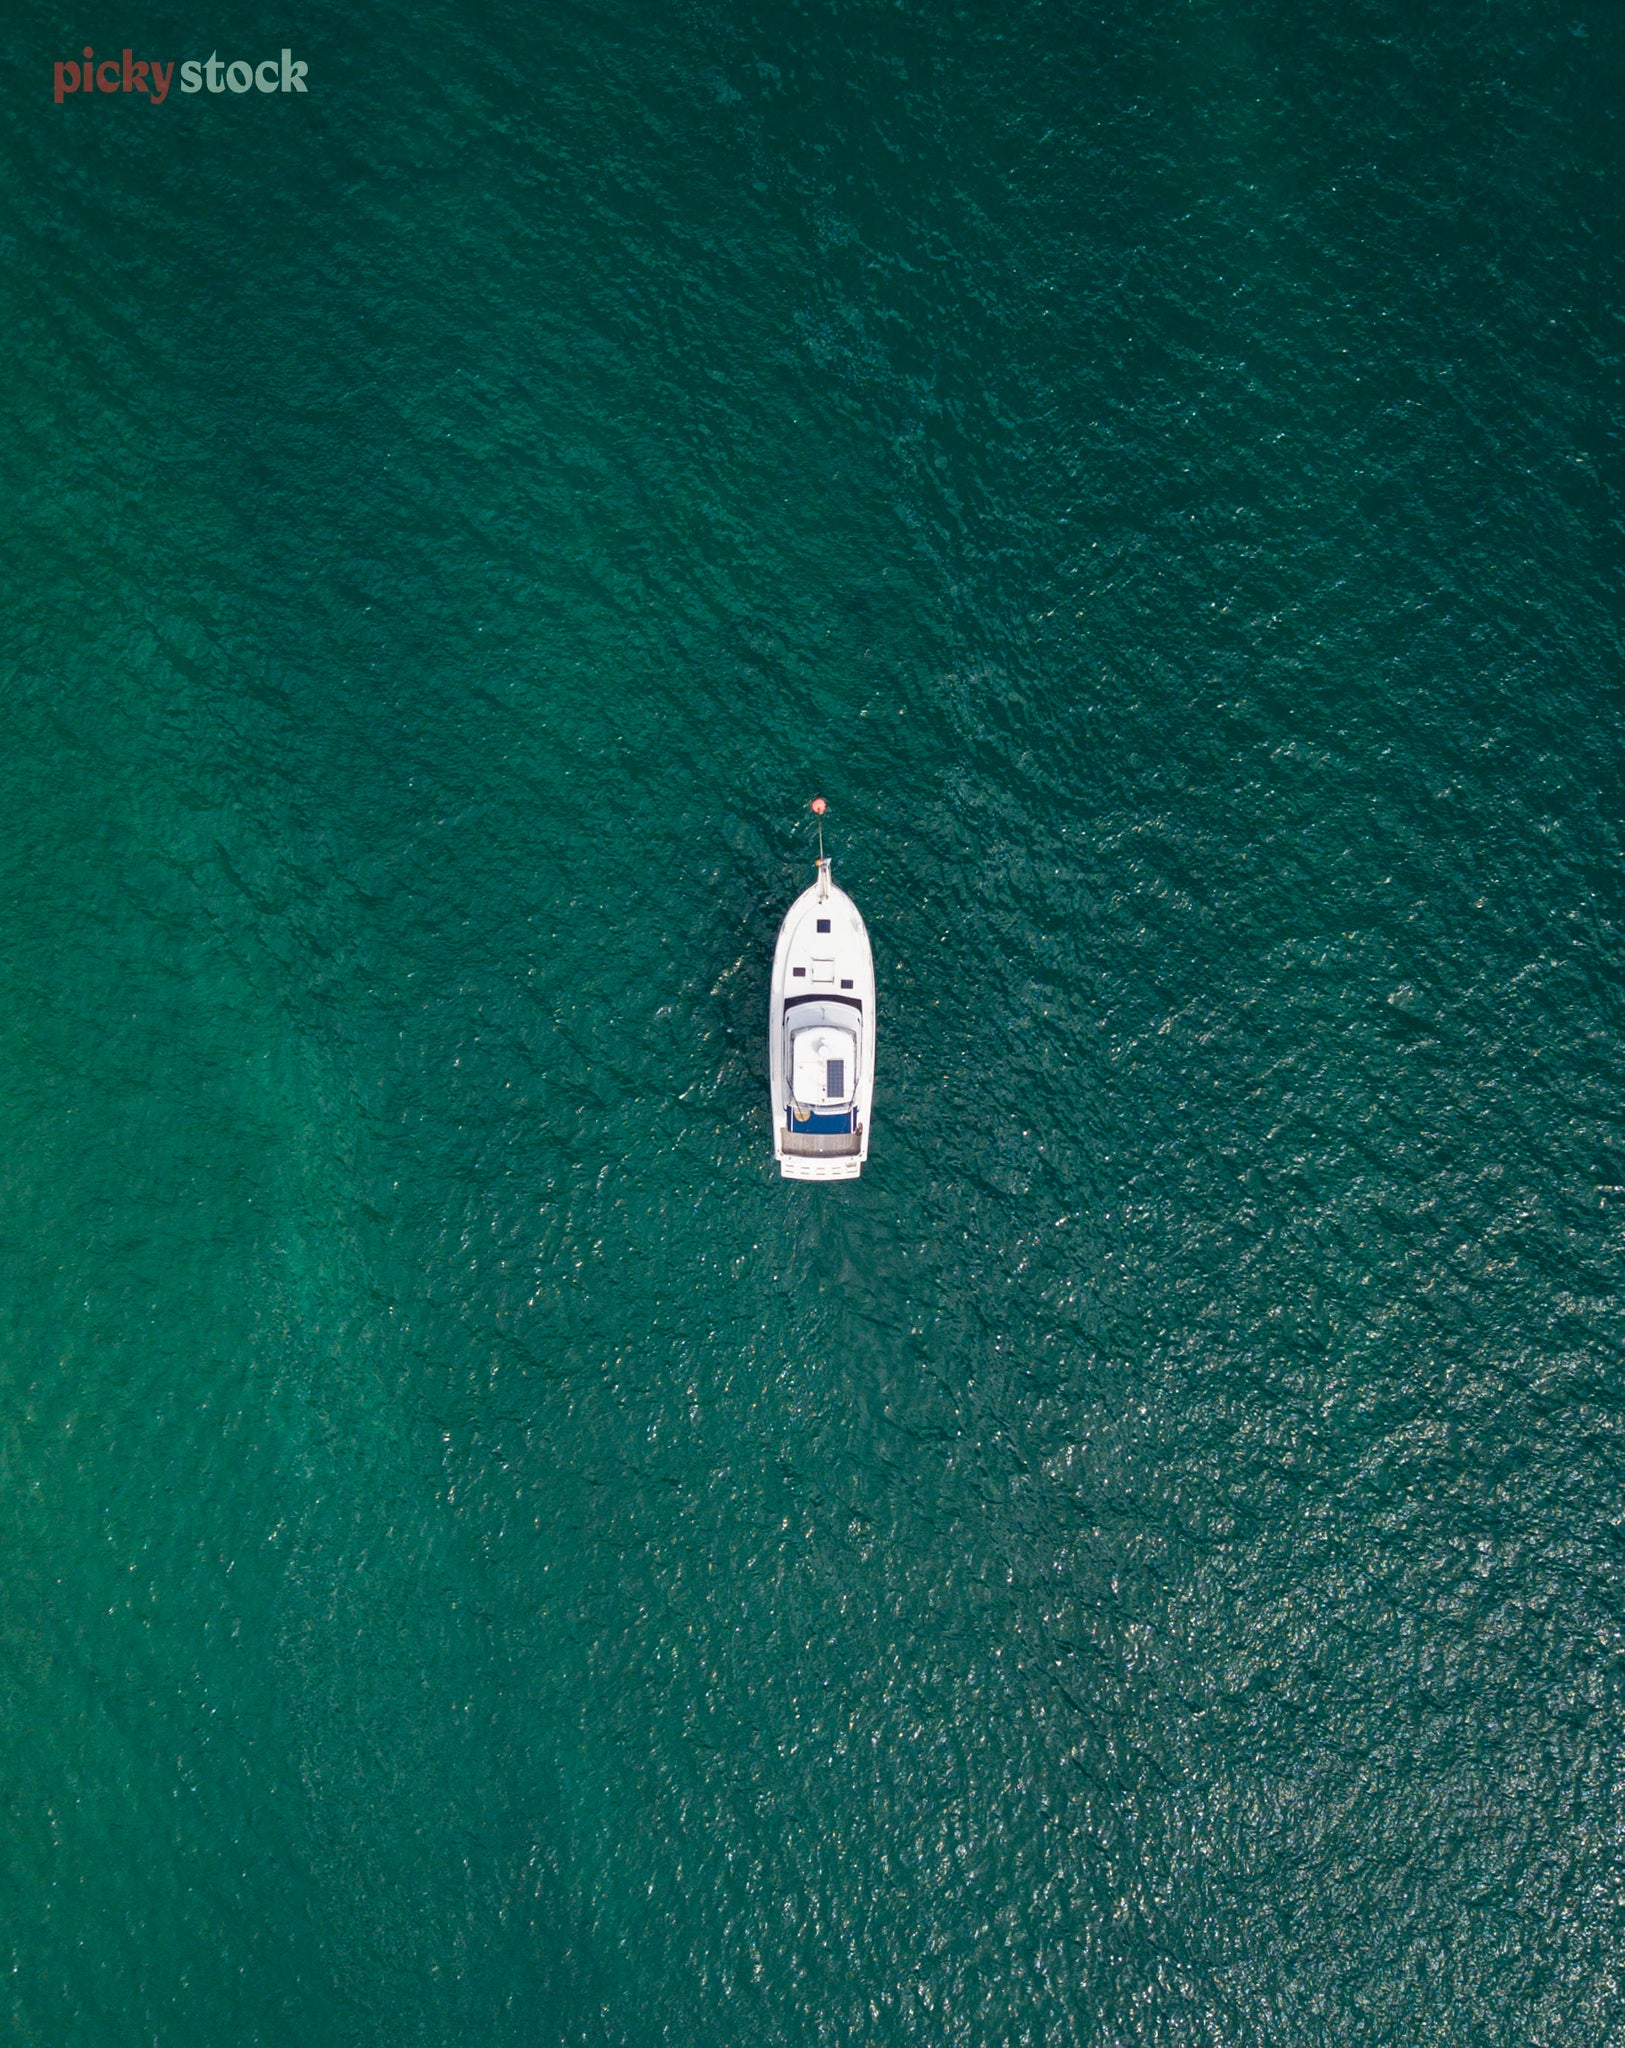 Birds eye image of a lone boat in the middle of the teal coloured still sea. 